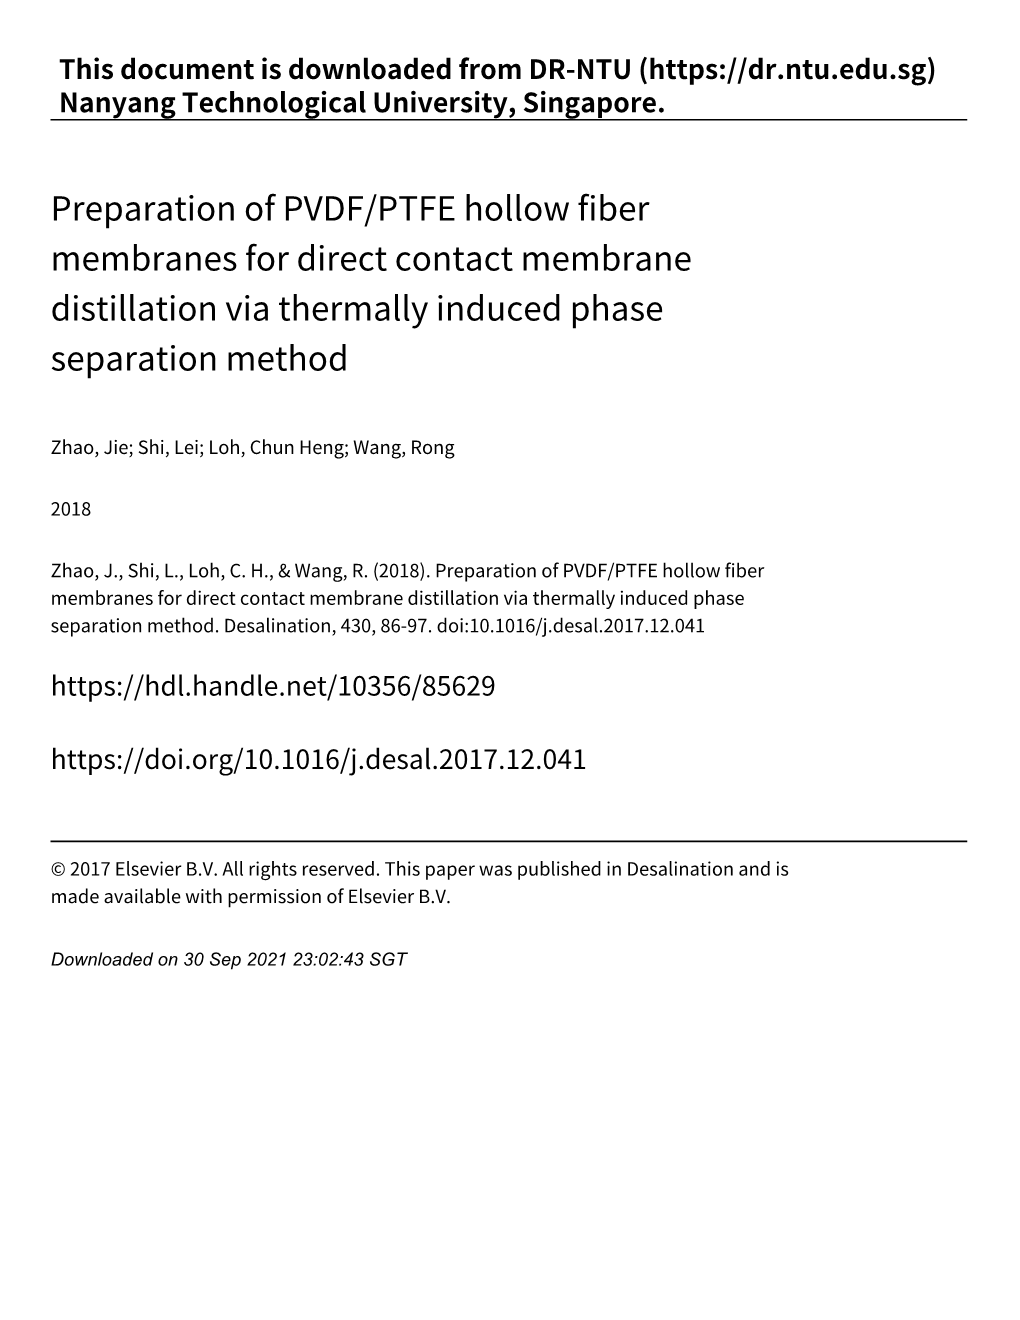 Preparation of PVDF/PTFE Hollow Fiber Membranes for Direct Contact Membrane Distillation Via Thermally Induced Phase Separation Method